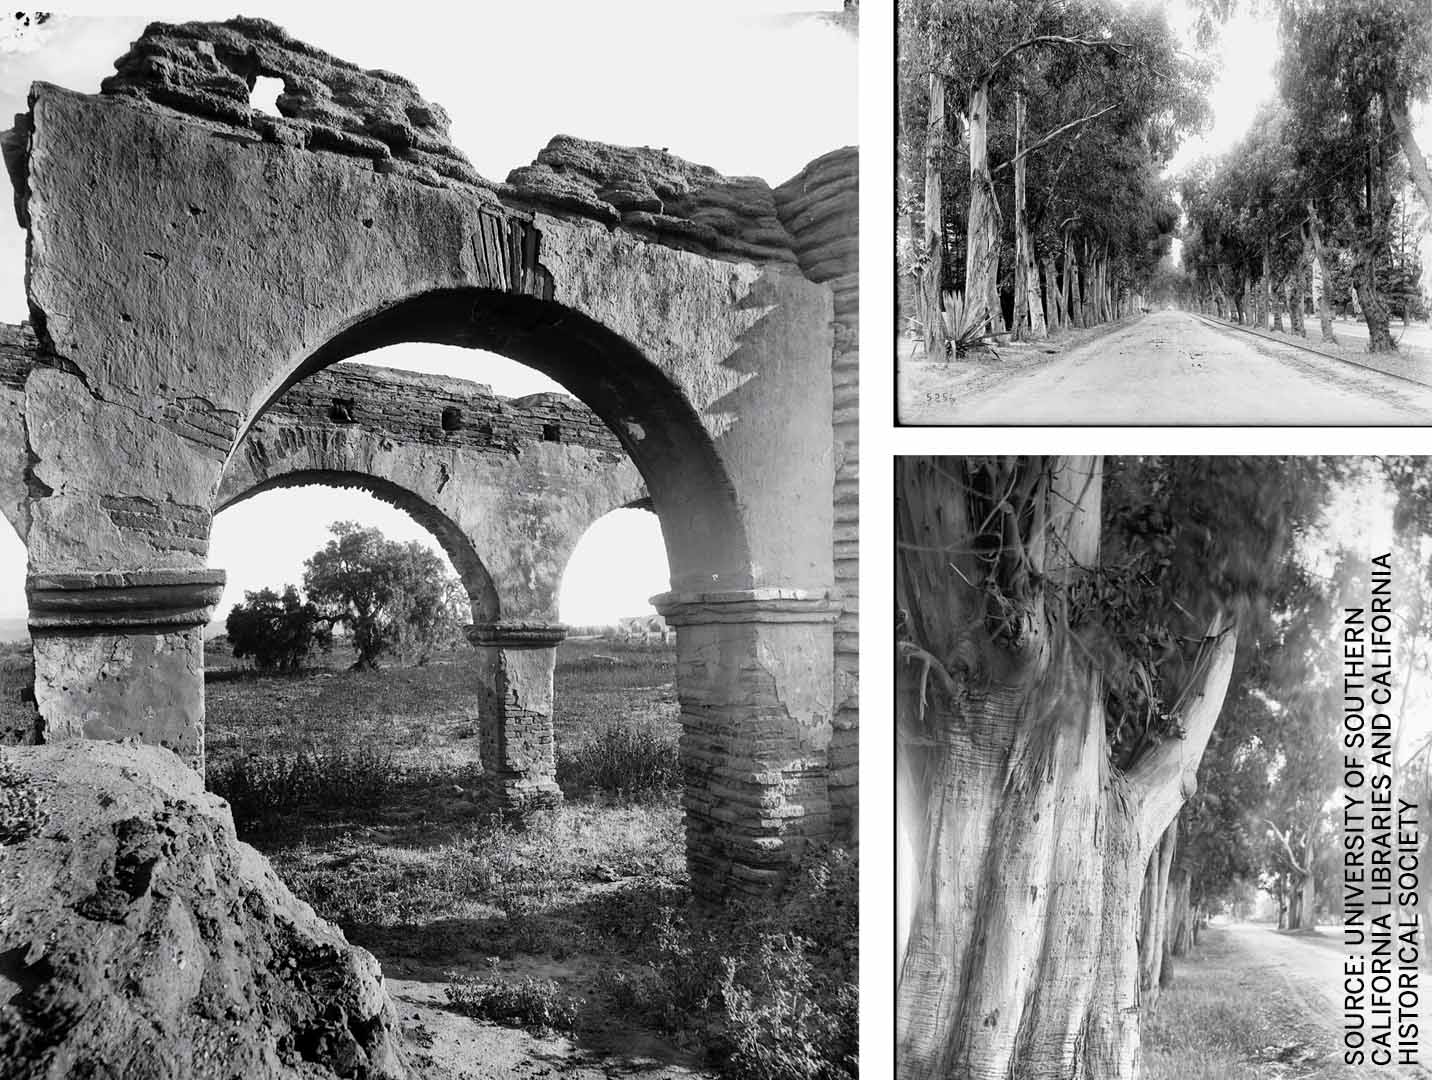 immigrant-trees-of-los-angeles=double-arches-old-entrance-mission-san-luis-rey-de-francia-framing-pepper-ca-1900-magnolia-avenuein-riverside-with-pepper-eucalyptus-1900-lined-corner-gower-street-melrose-avenue